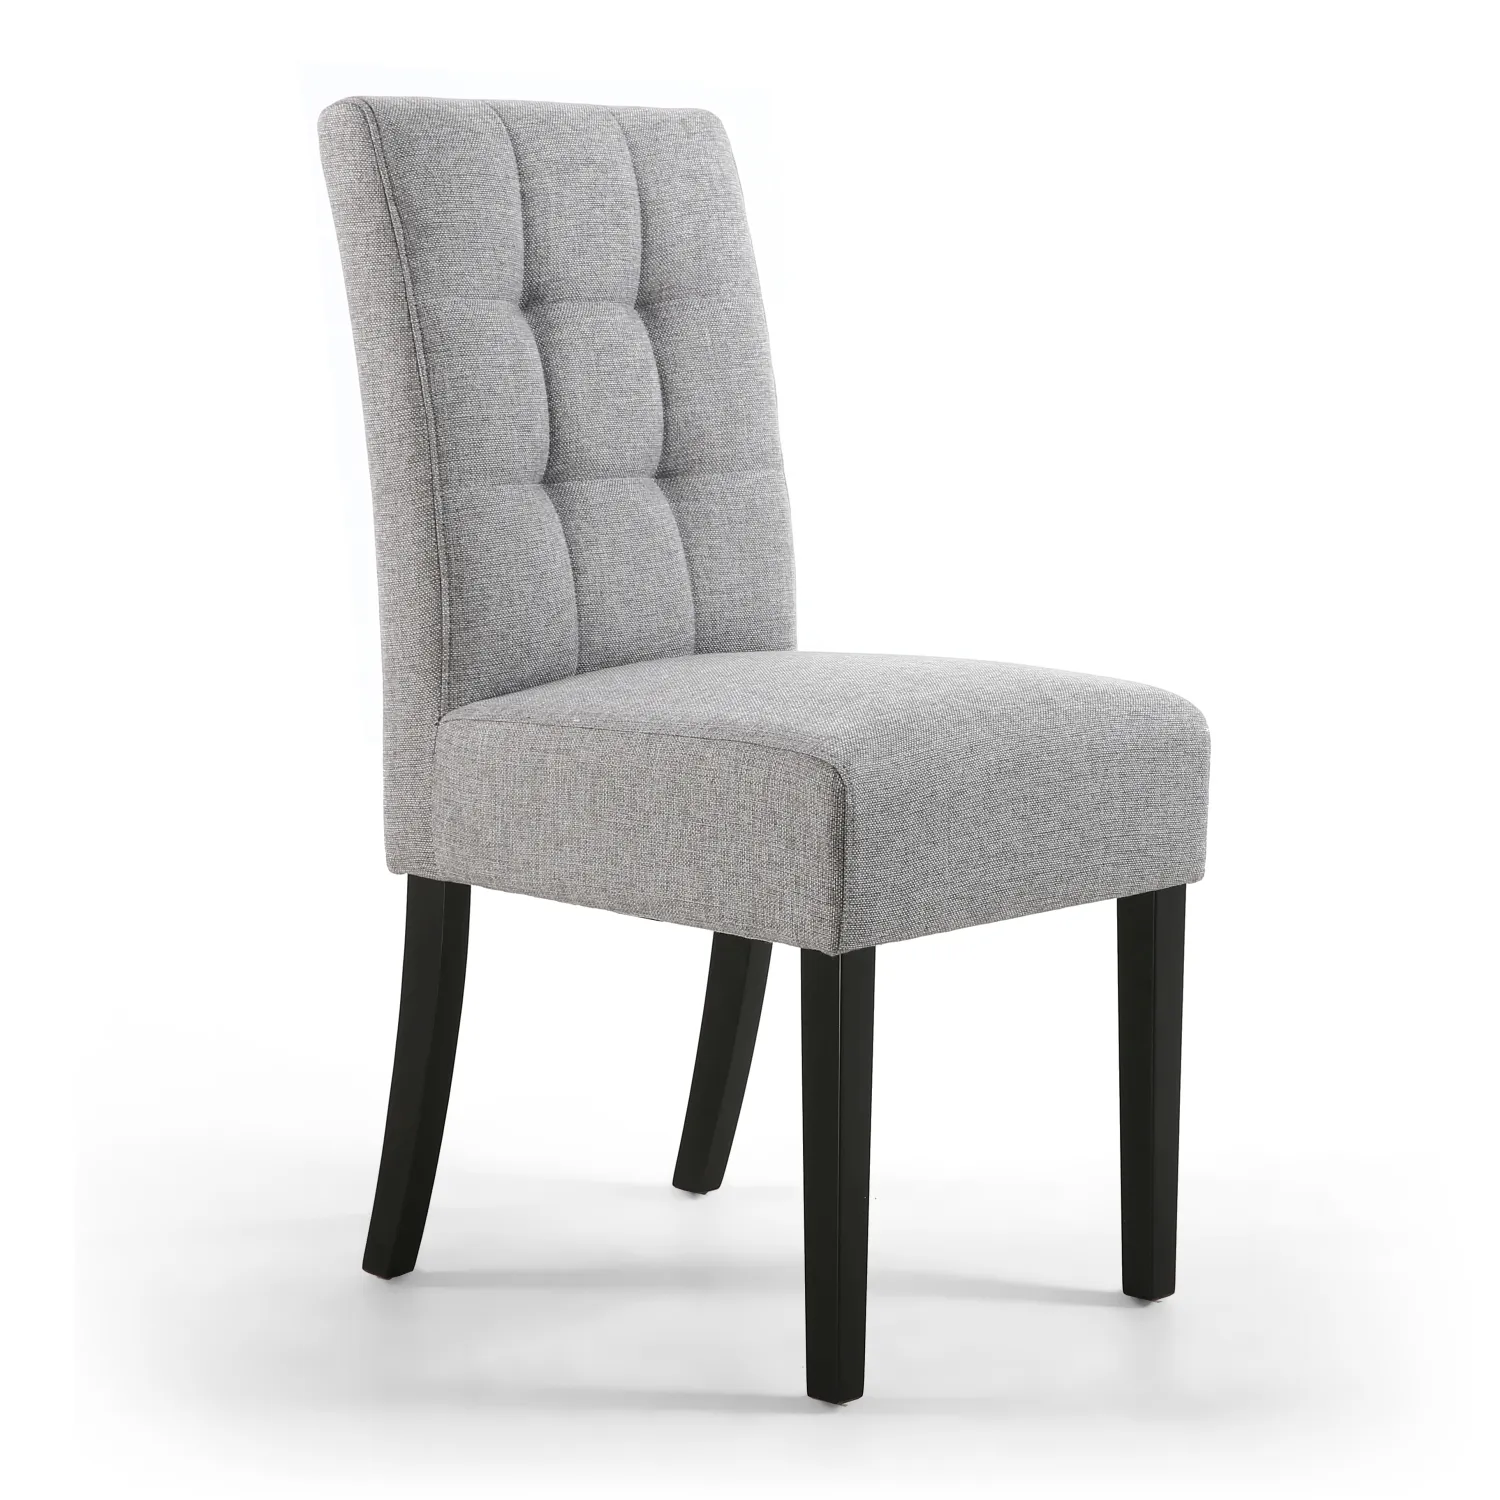 Silver Grey Linen Fabric Stitched Waffle Dining Chair